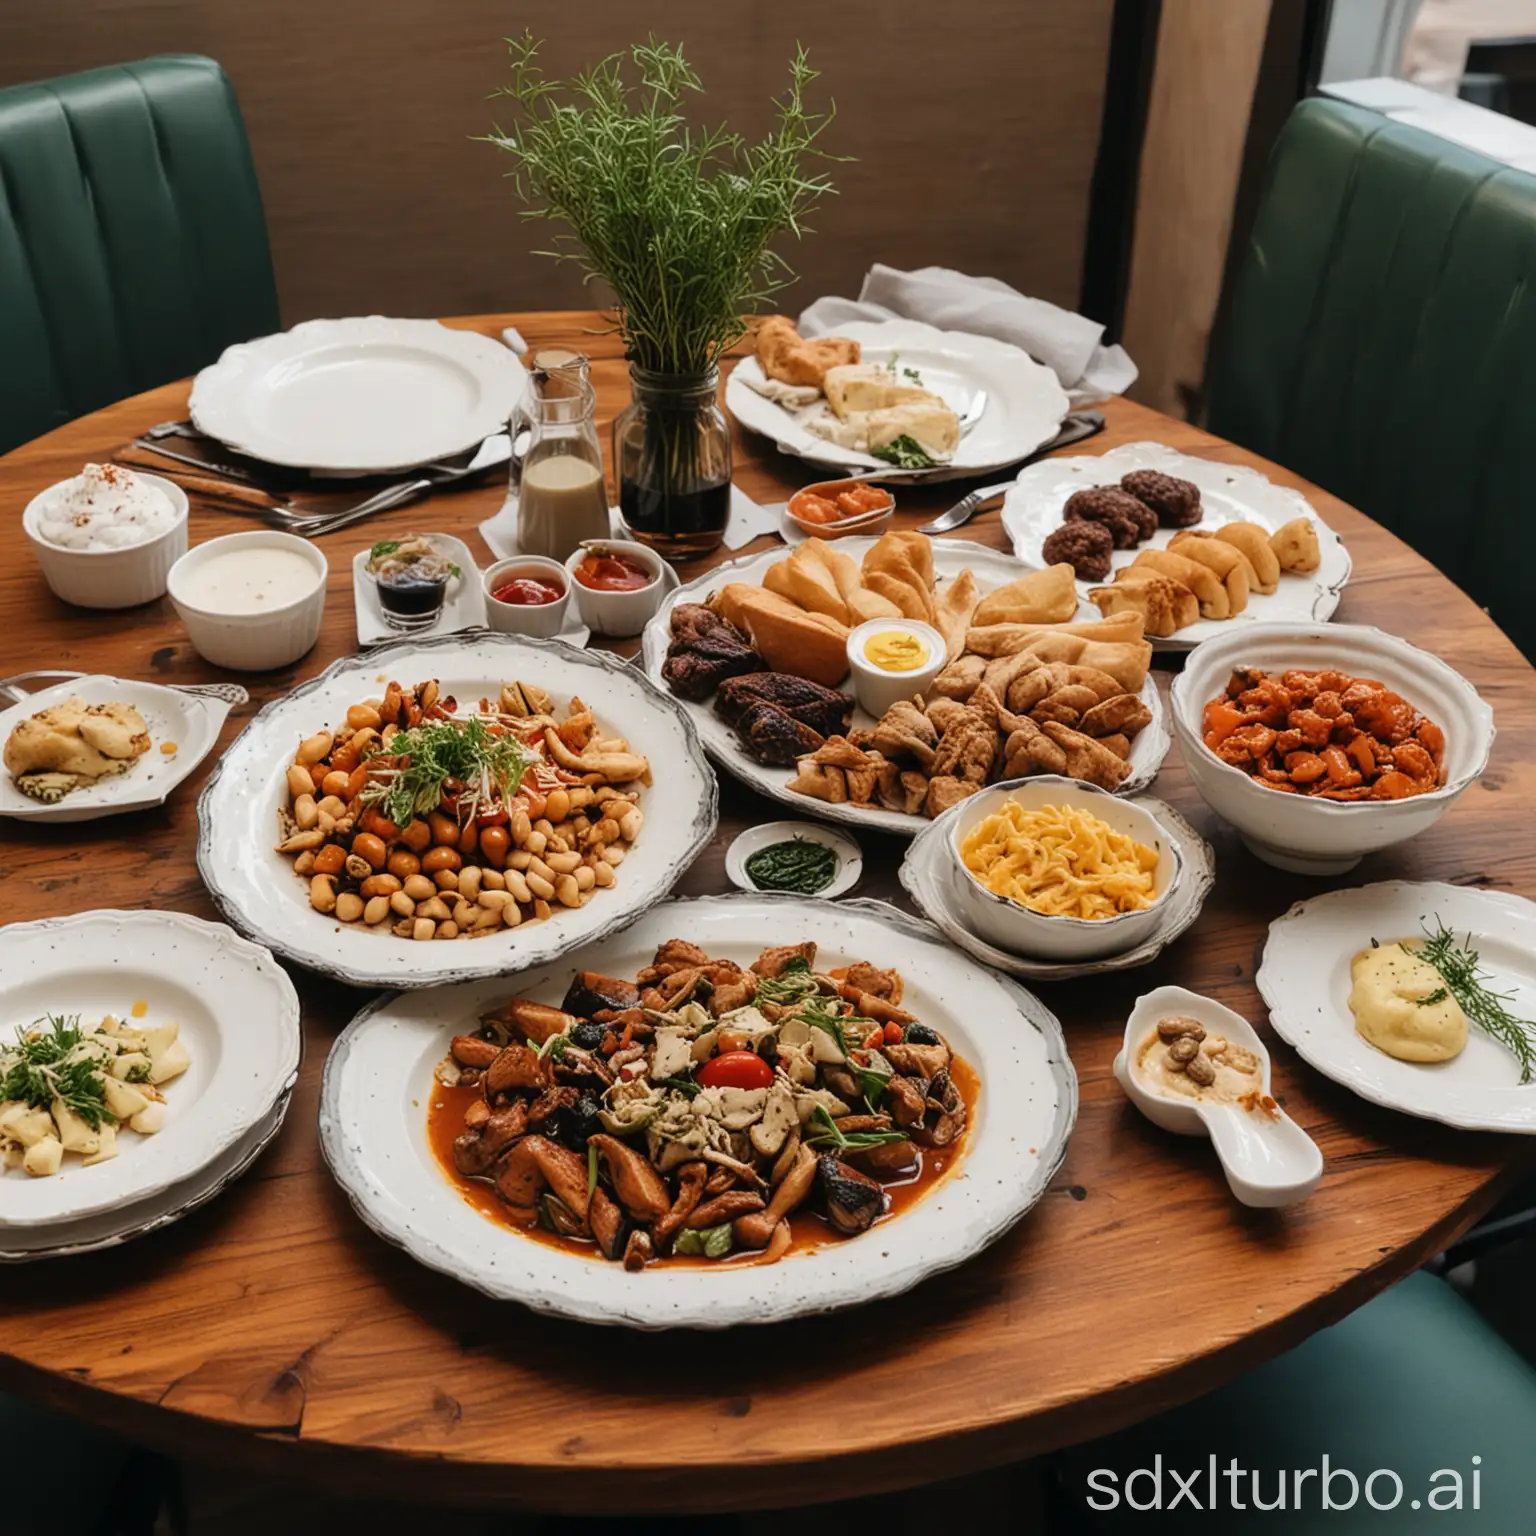 A table in a restaurant. The table is set with a plate of food. The food is delicious-looking.